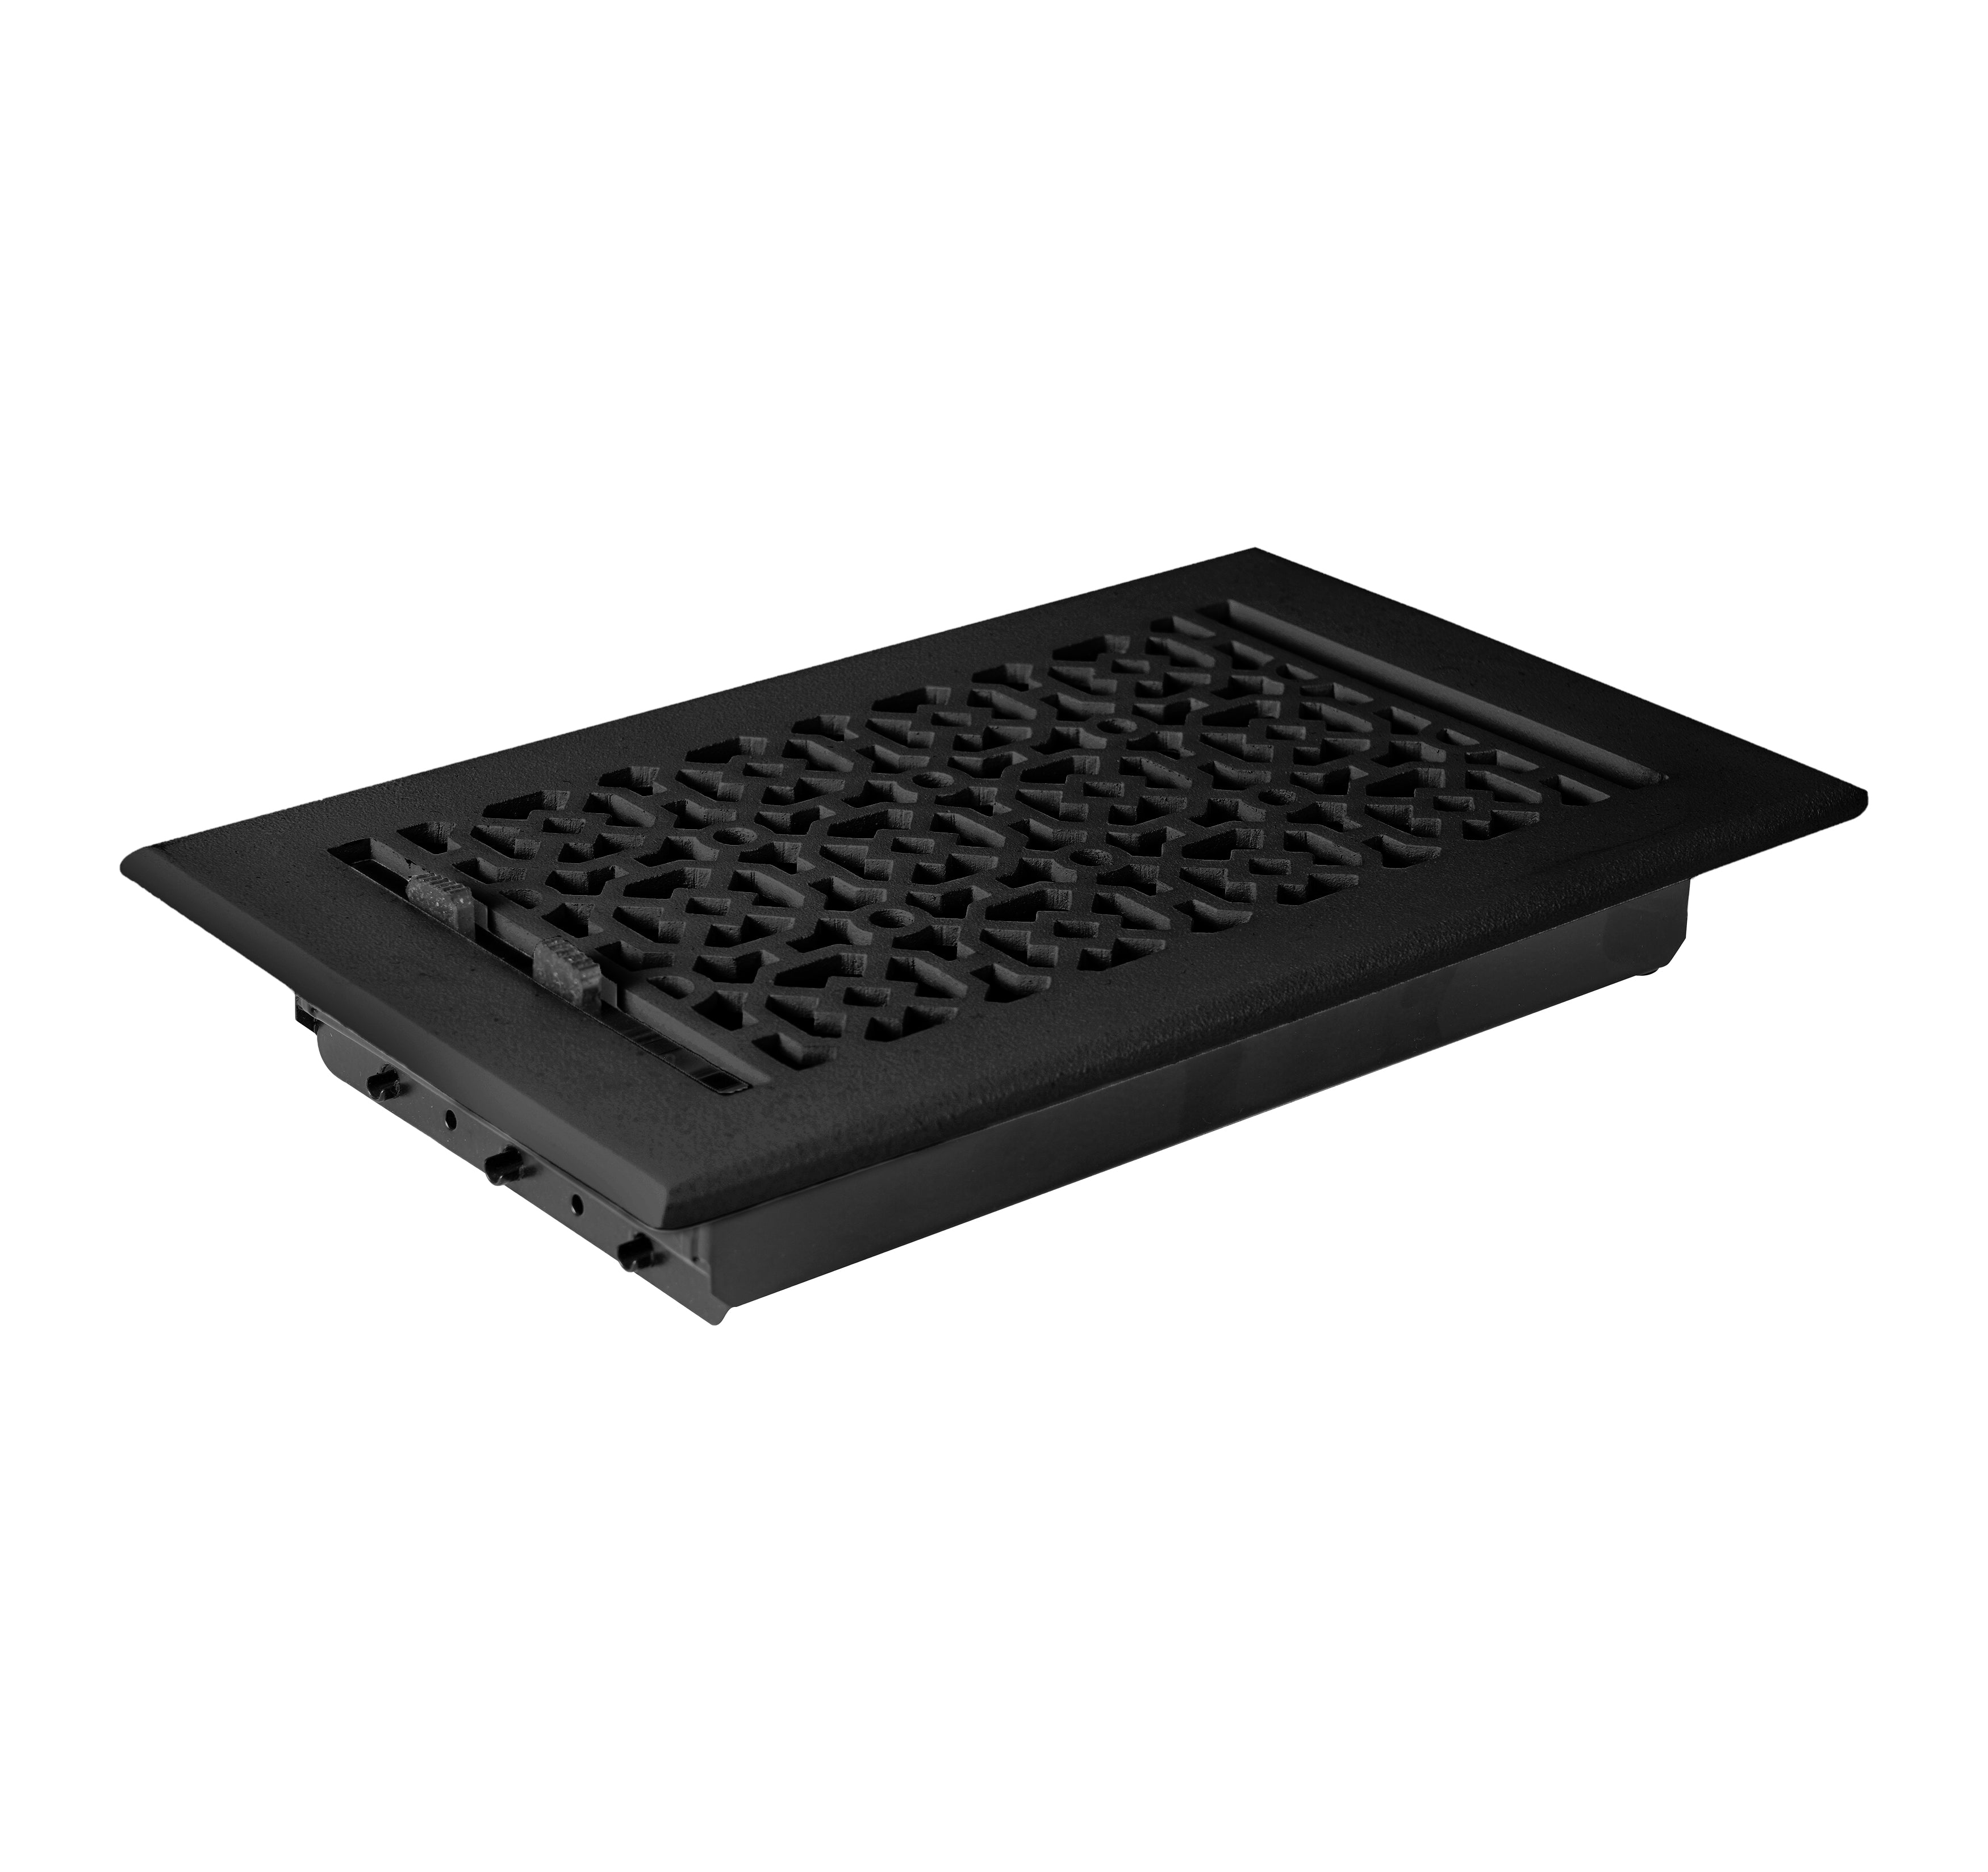 Achtek Air Supply Vent 6"x 10" Duct Opening (Overall 7-1/2"x 11-3/4") Solid Cast Aluminium Register Cover | Powder Coated